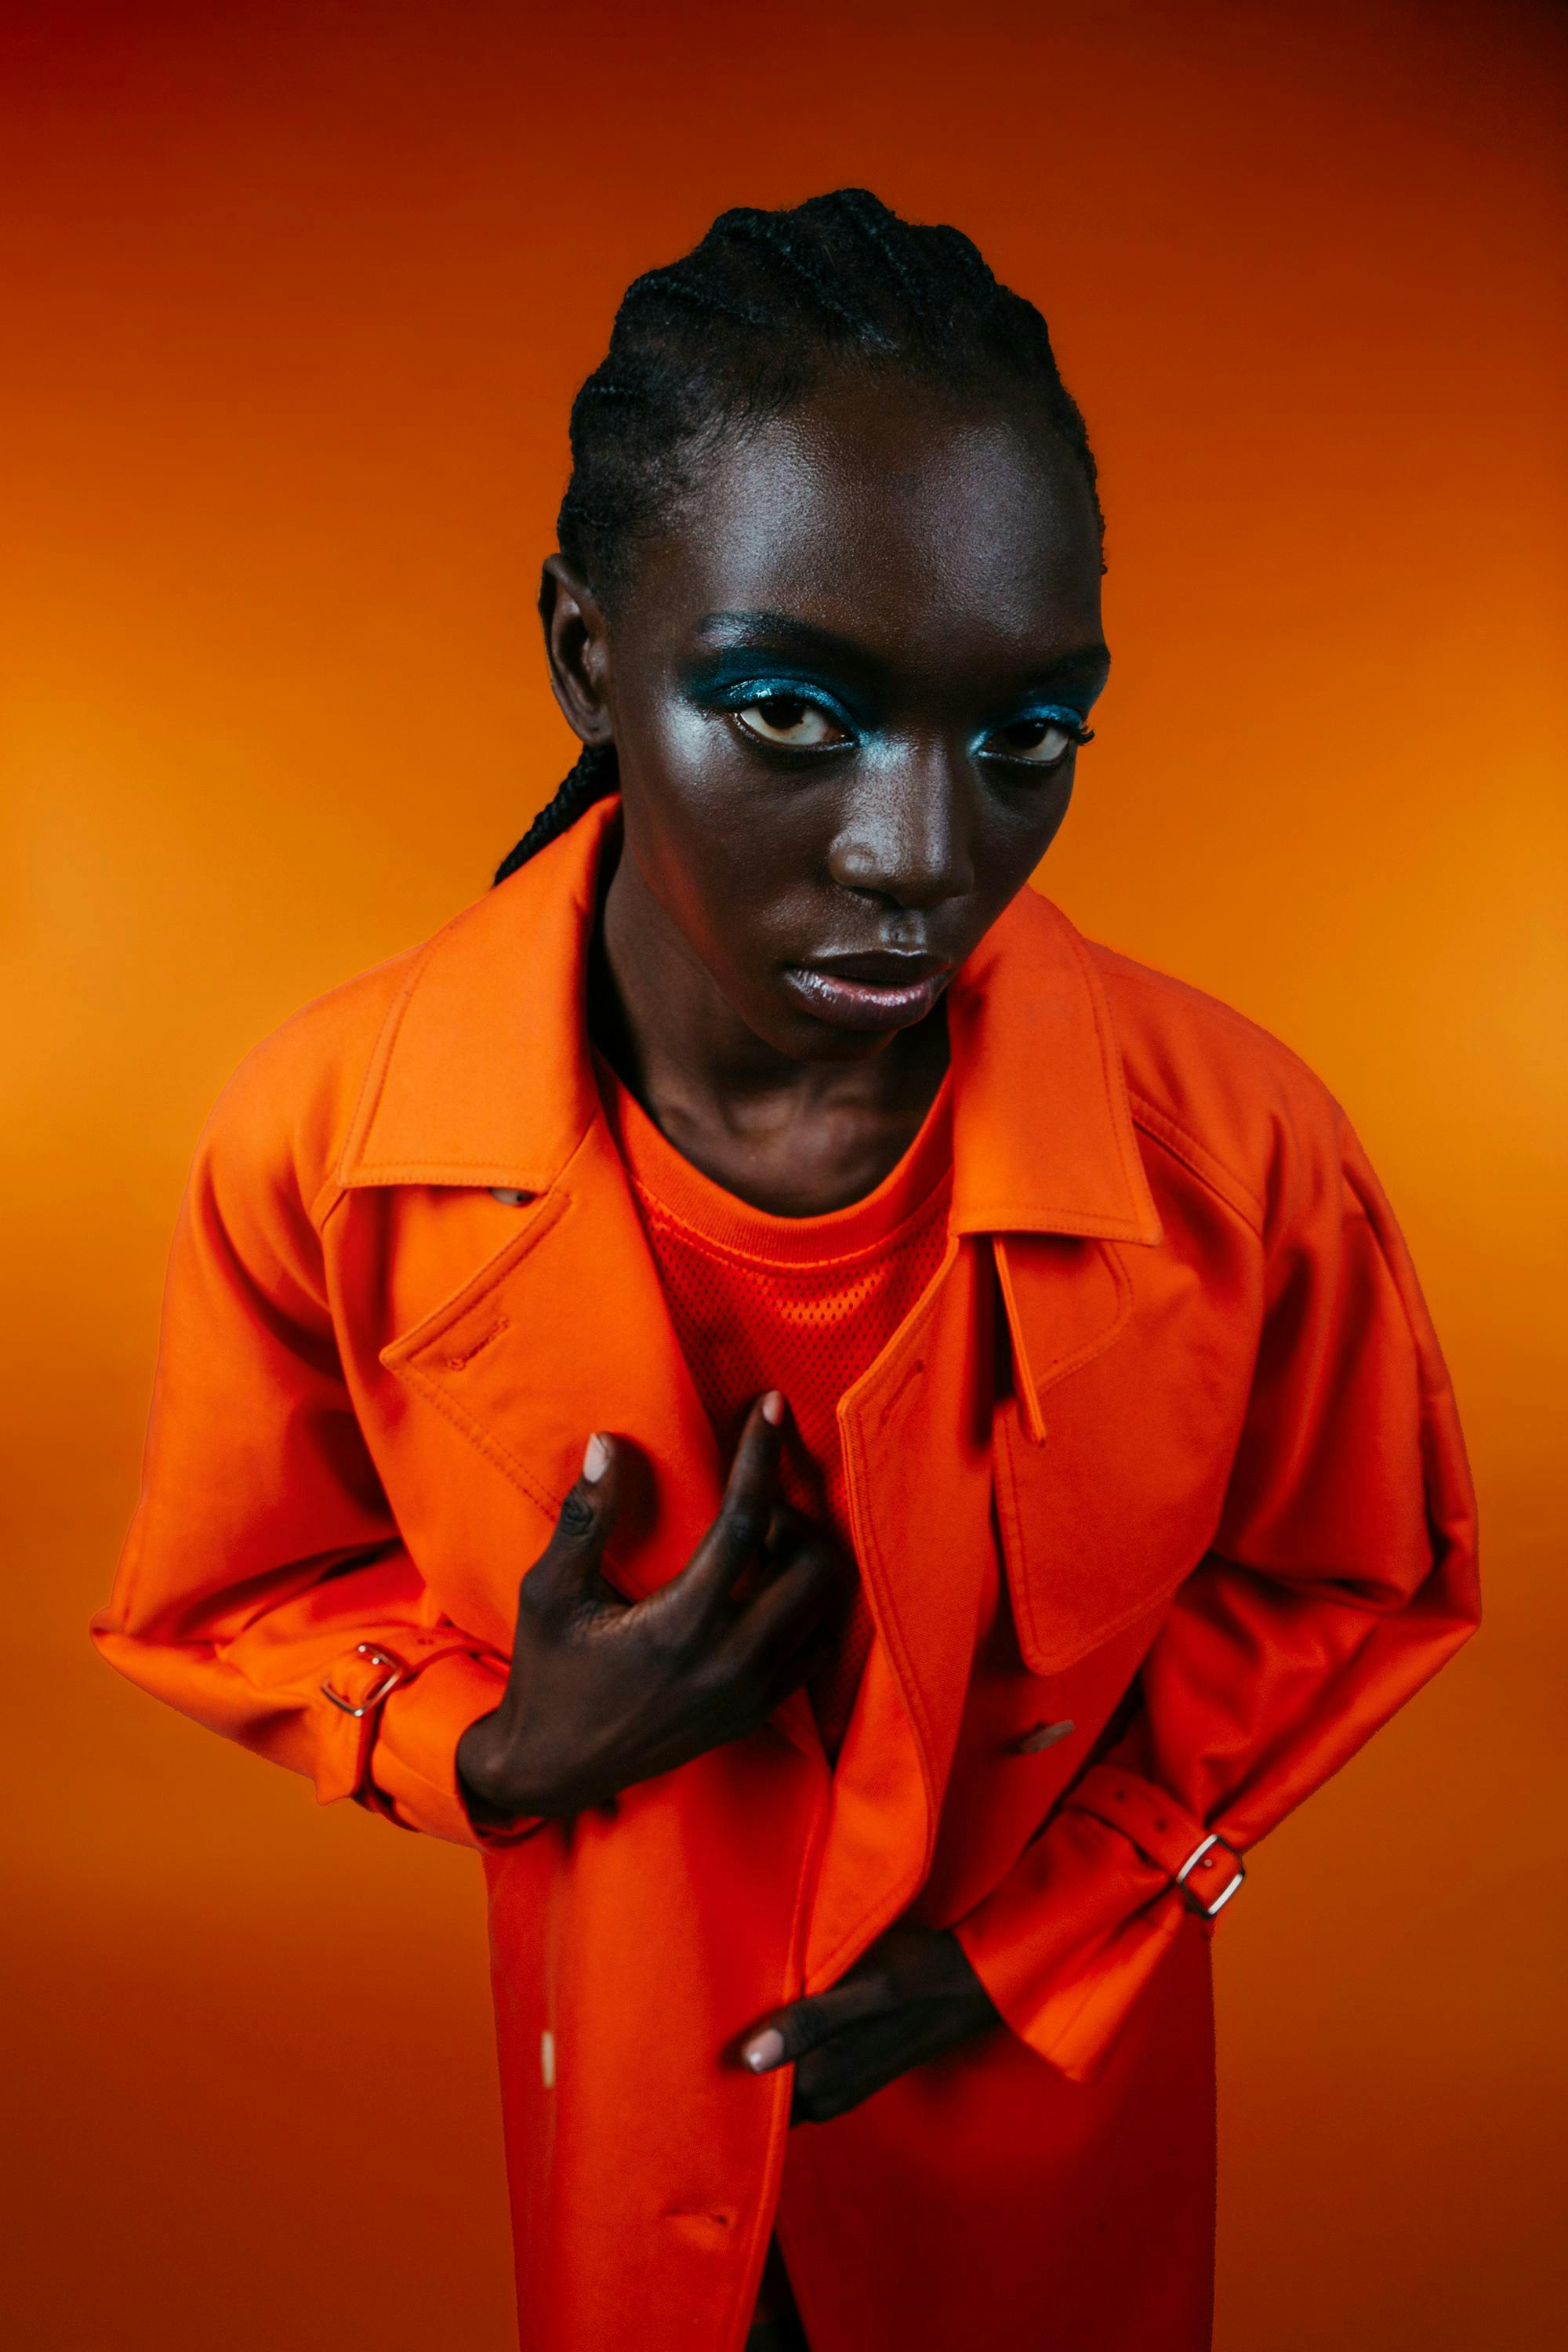 model with blue eyeshadow wearing a bright orange blazer, shirt, and watch for monochromatic citrus orange outfit.